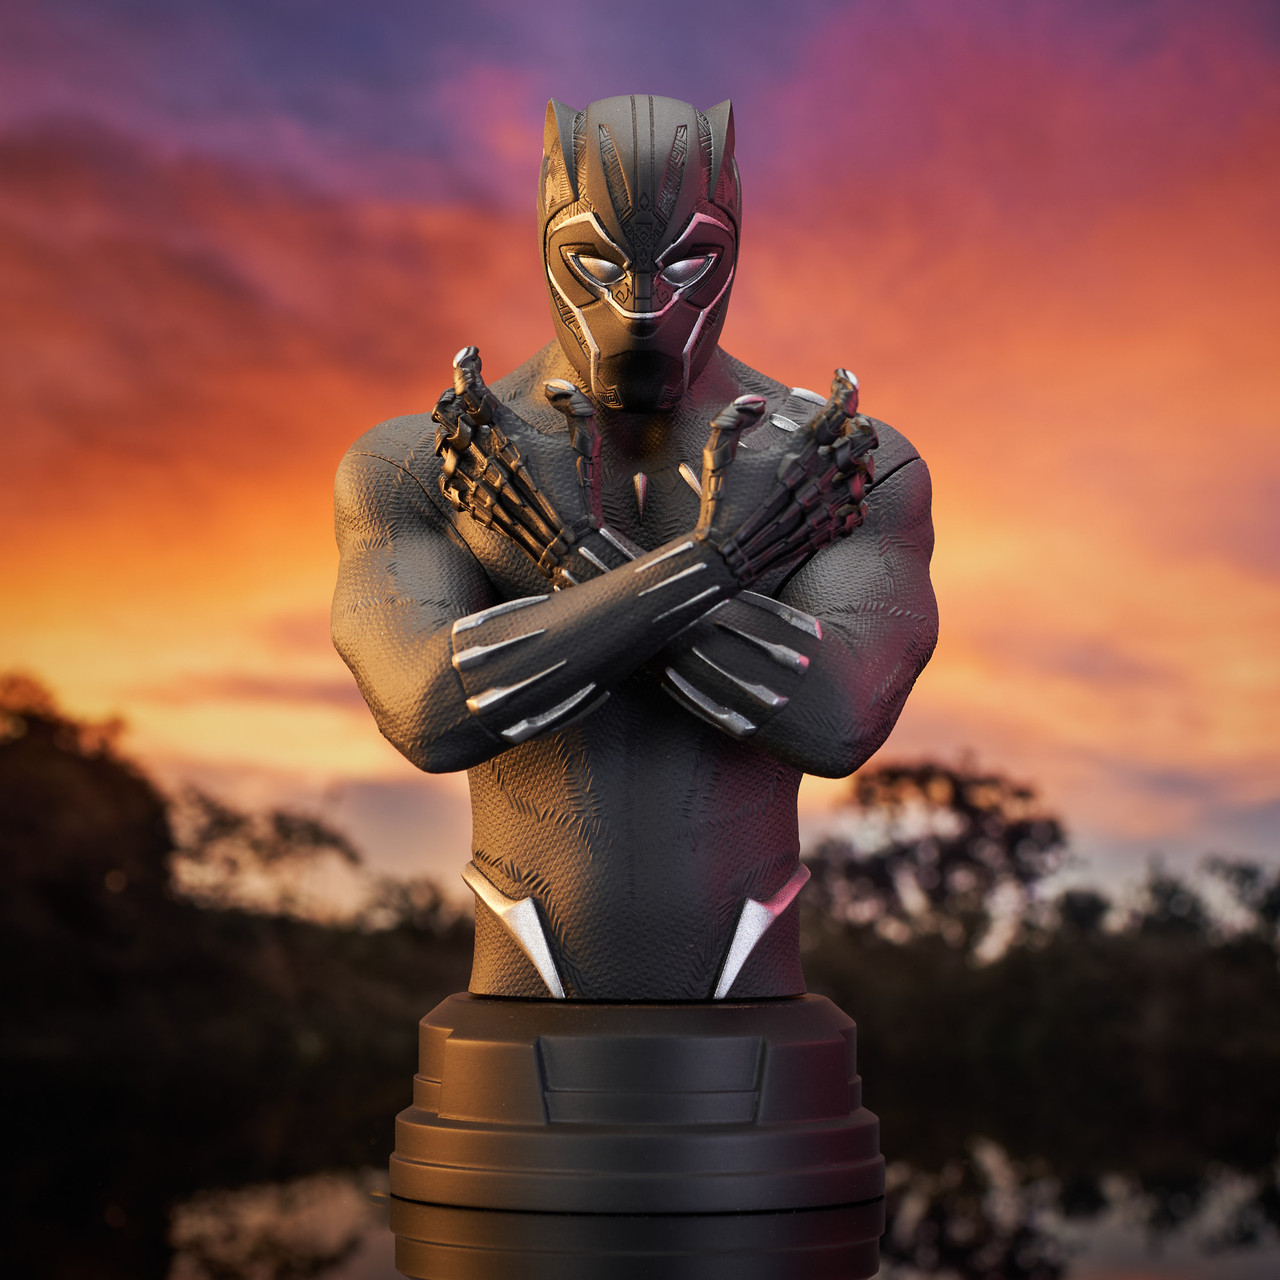 The Avengers Black Panther Bust Model Decoration Figurine 7'' In Stock Toys 